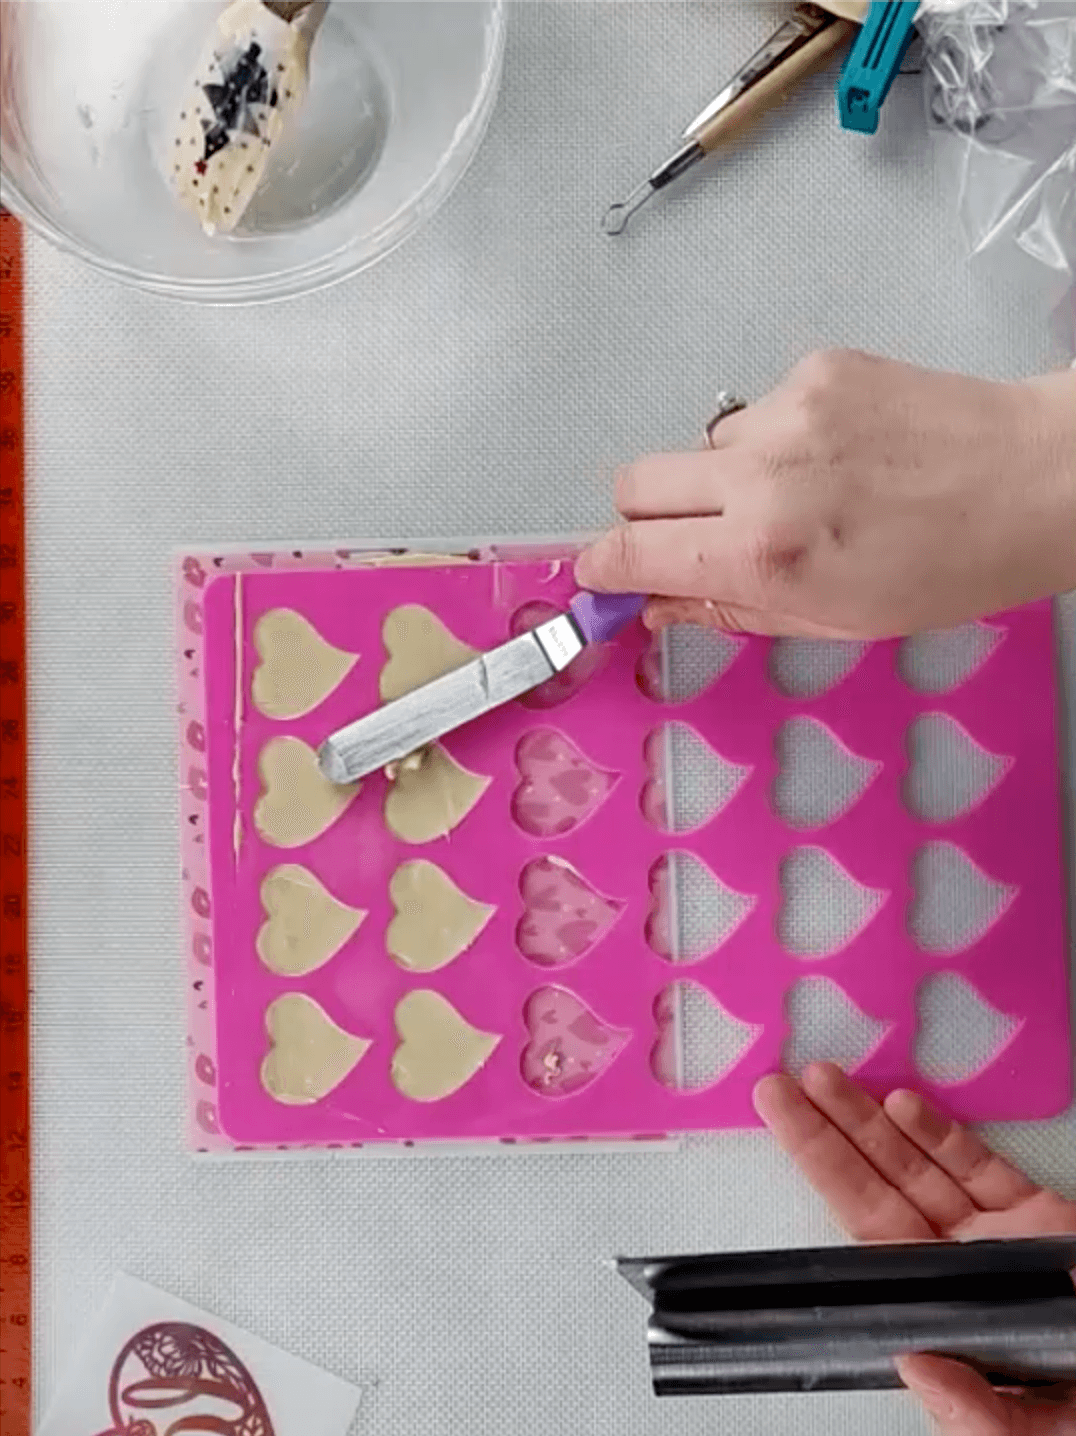 All about Chocolate and Transfer Sheets Masterclass with Joana from @sweetsbyjoana.